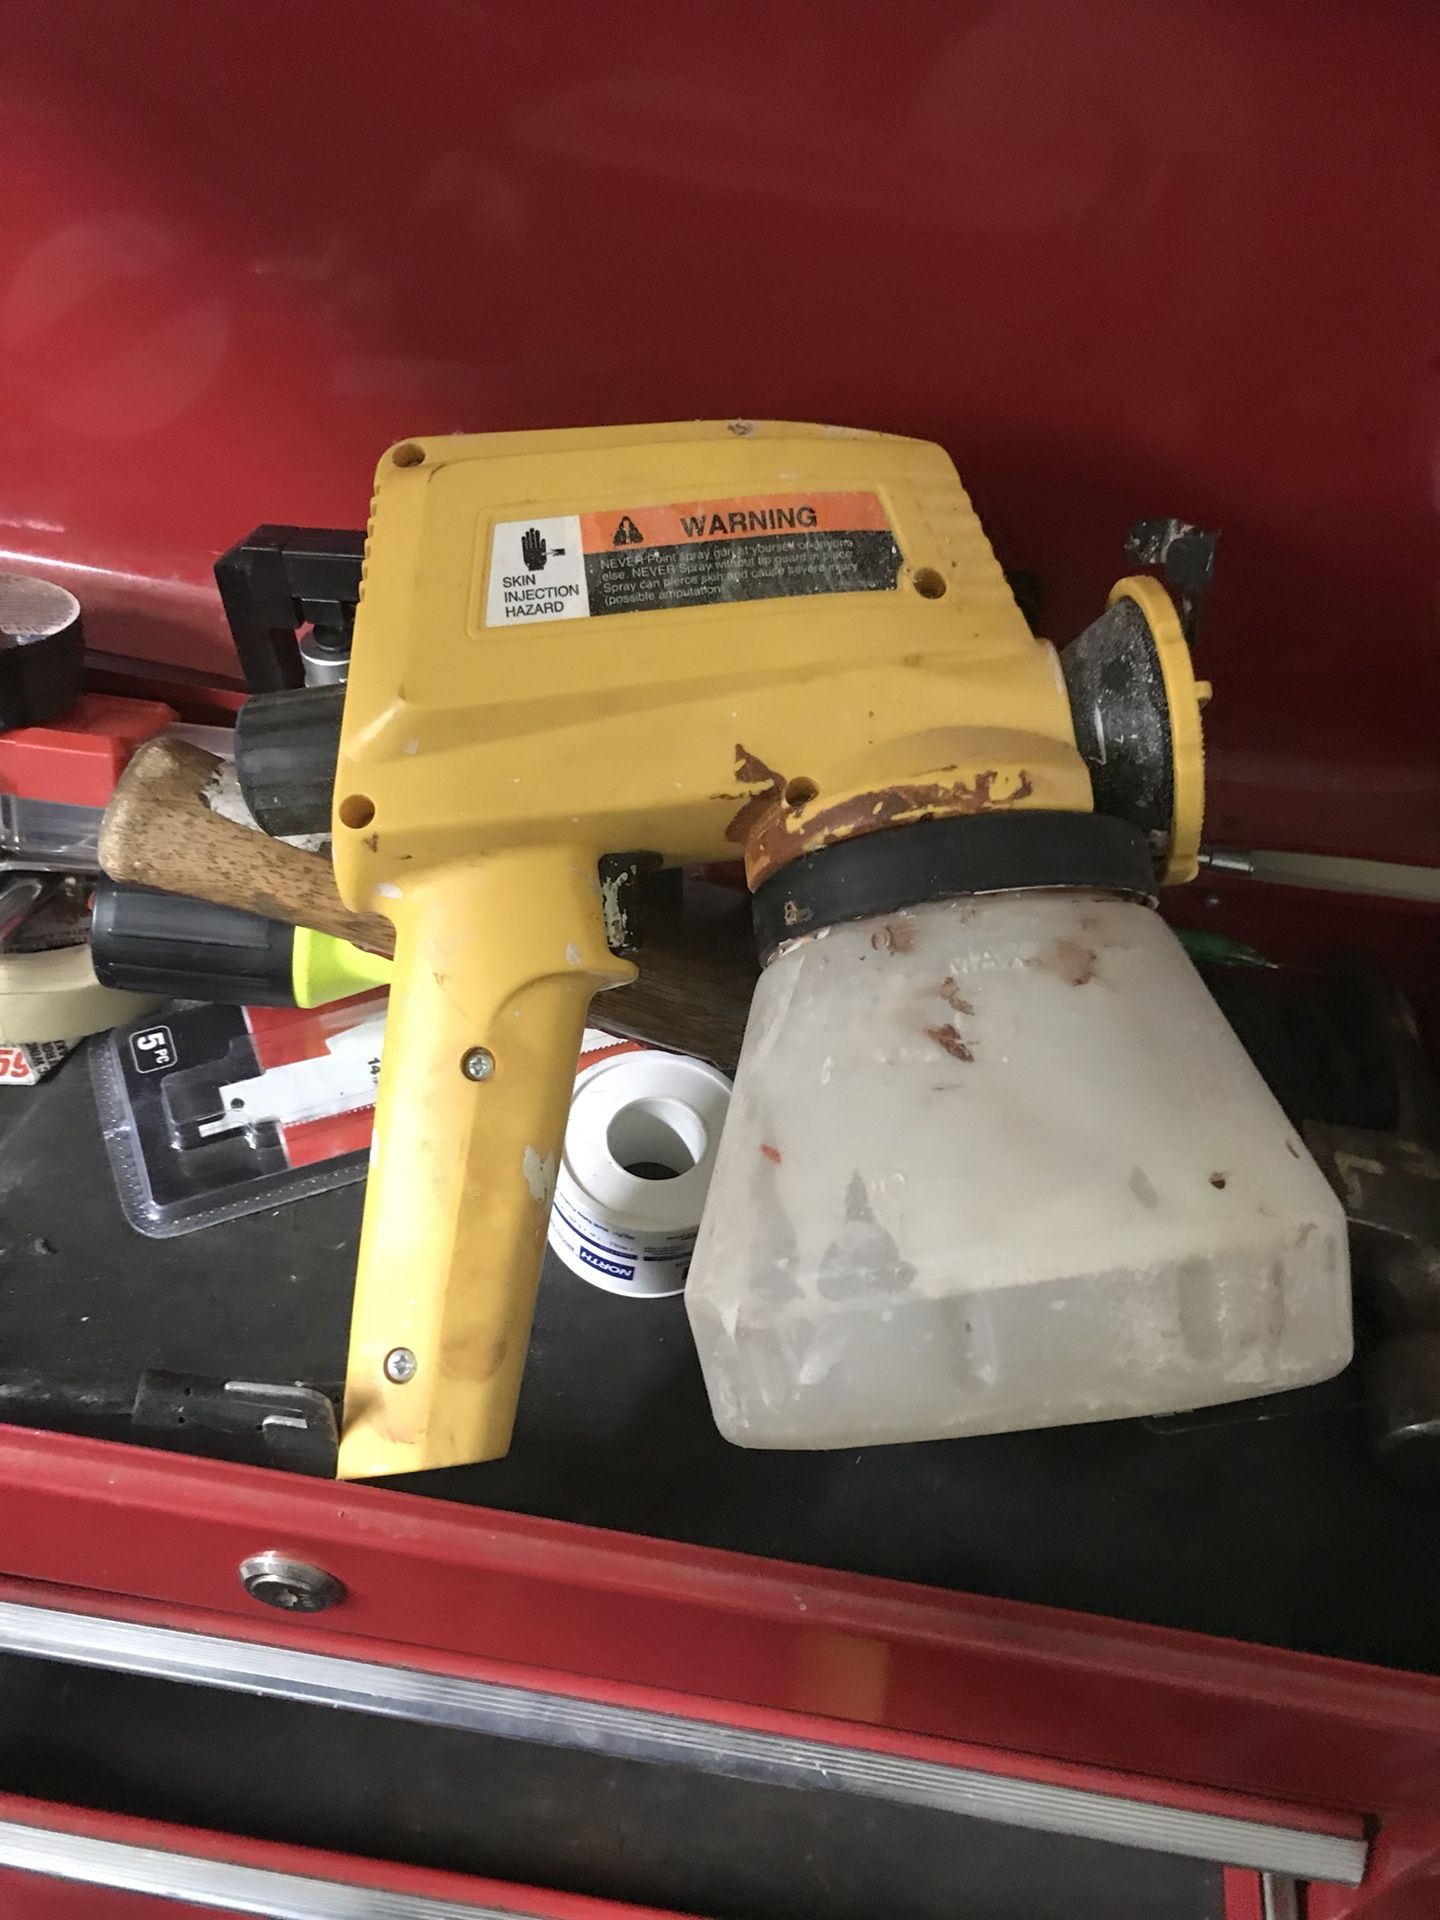 More tools for Sale